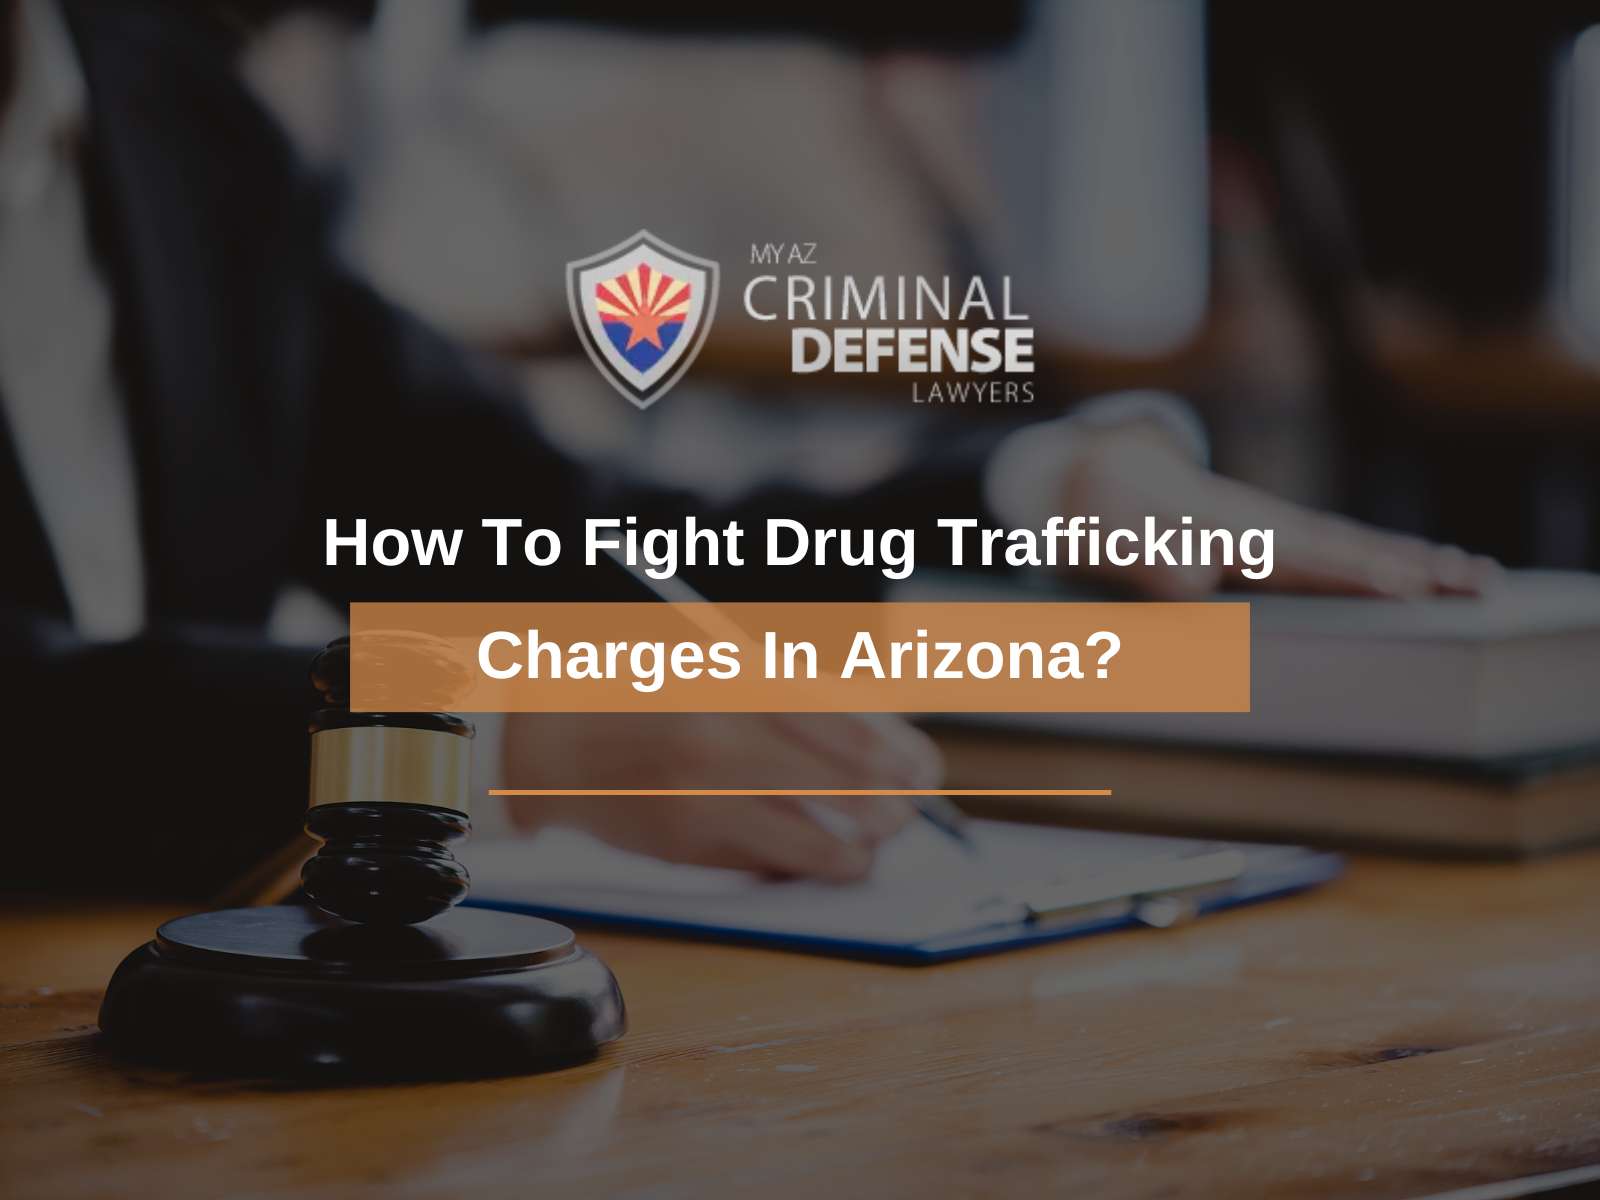 How To Fight Drug Trafficking Charges In Arizona